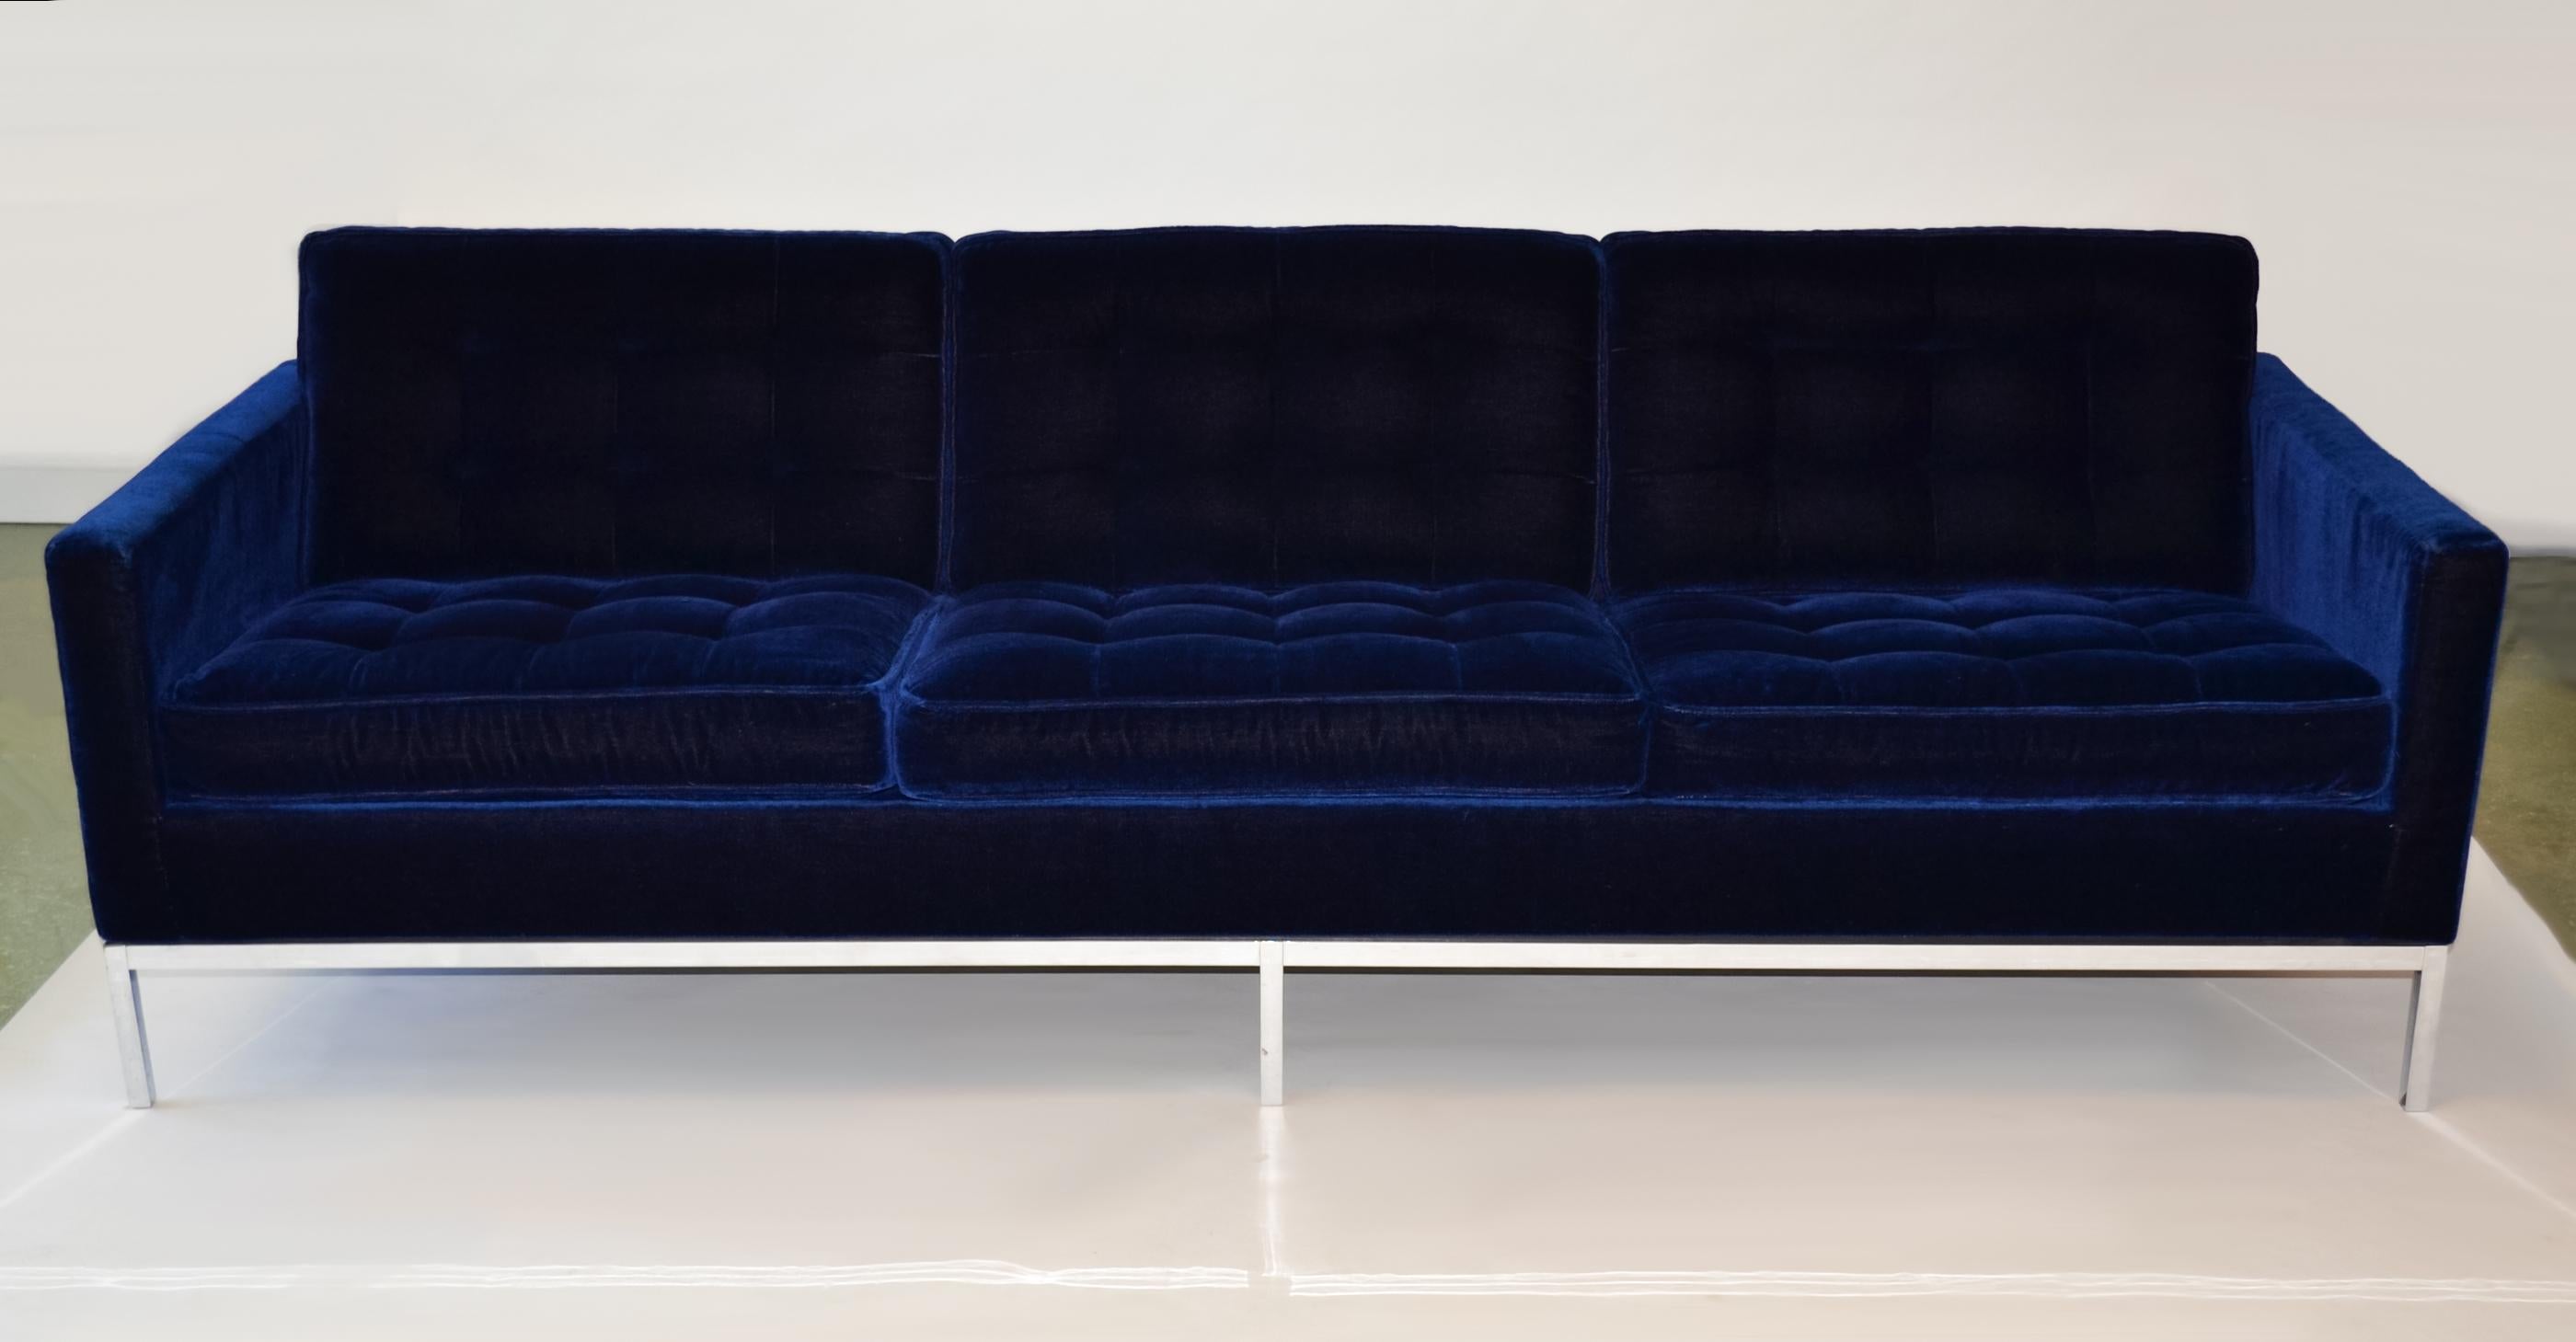 Knoll Three Seat Sofa in Original Dark Blue Mohair, 1970s
Original Sapphire Blue mohair upholstery on a chrome finished steel base with six (6) legs (chrome loss to one leg). 
Comfortable, striking geometry meets Mid-Century Modern USA, 1954 /